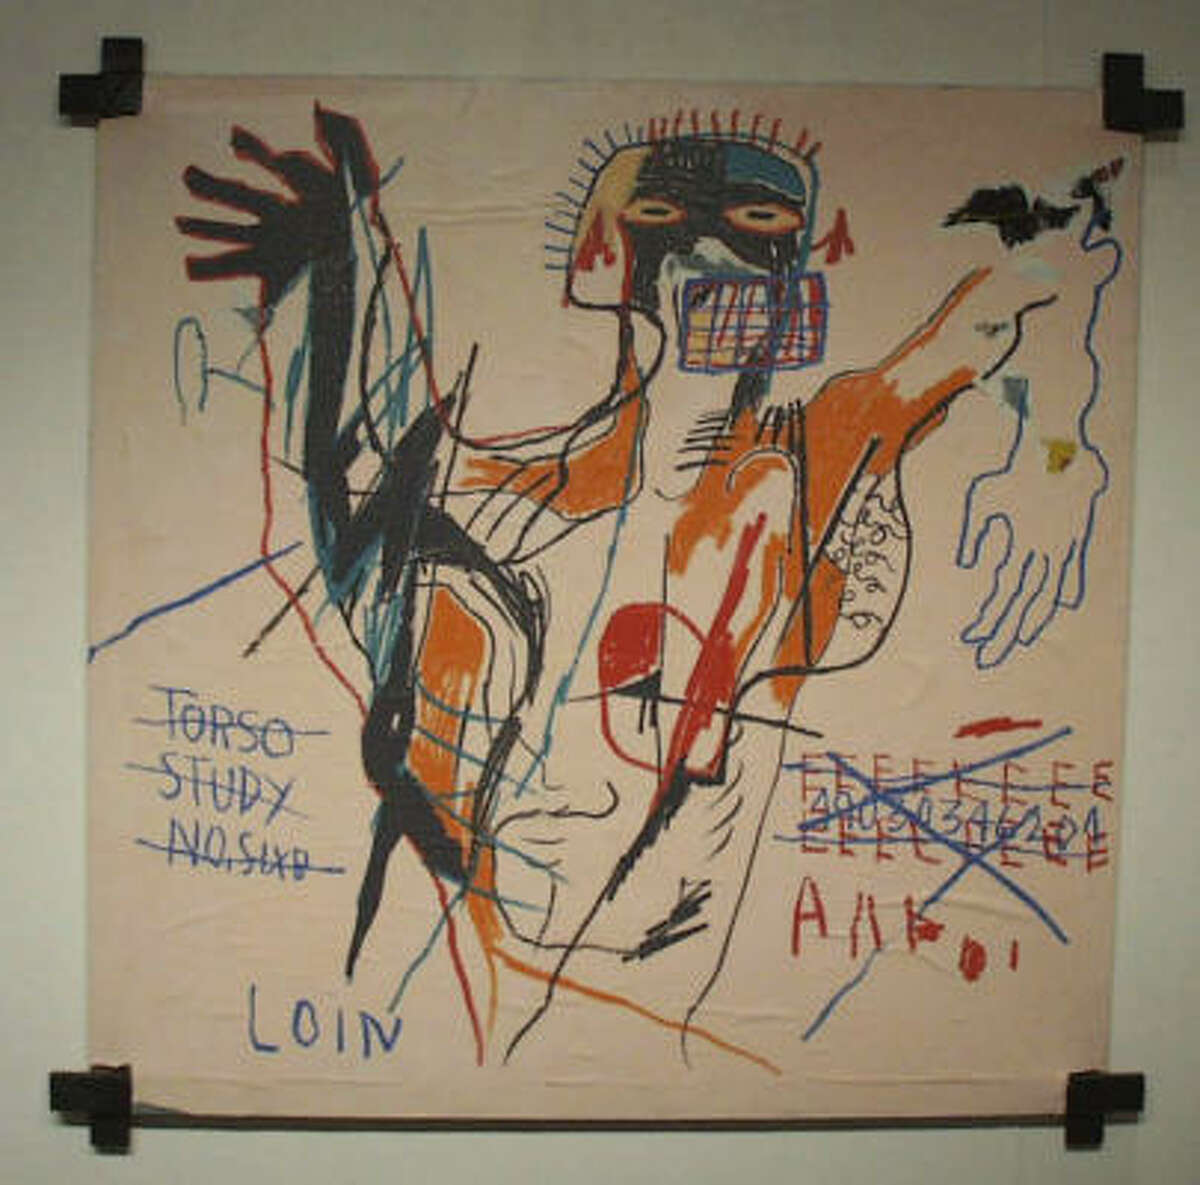 Franklin Sirmans' career came together after he co-curated a retrospective of Jean-Michel Basquiat for the Brooklyn Museum in 2005. This is Basquiat's A next loin and/or.